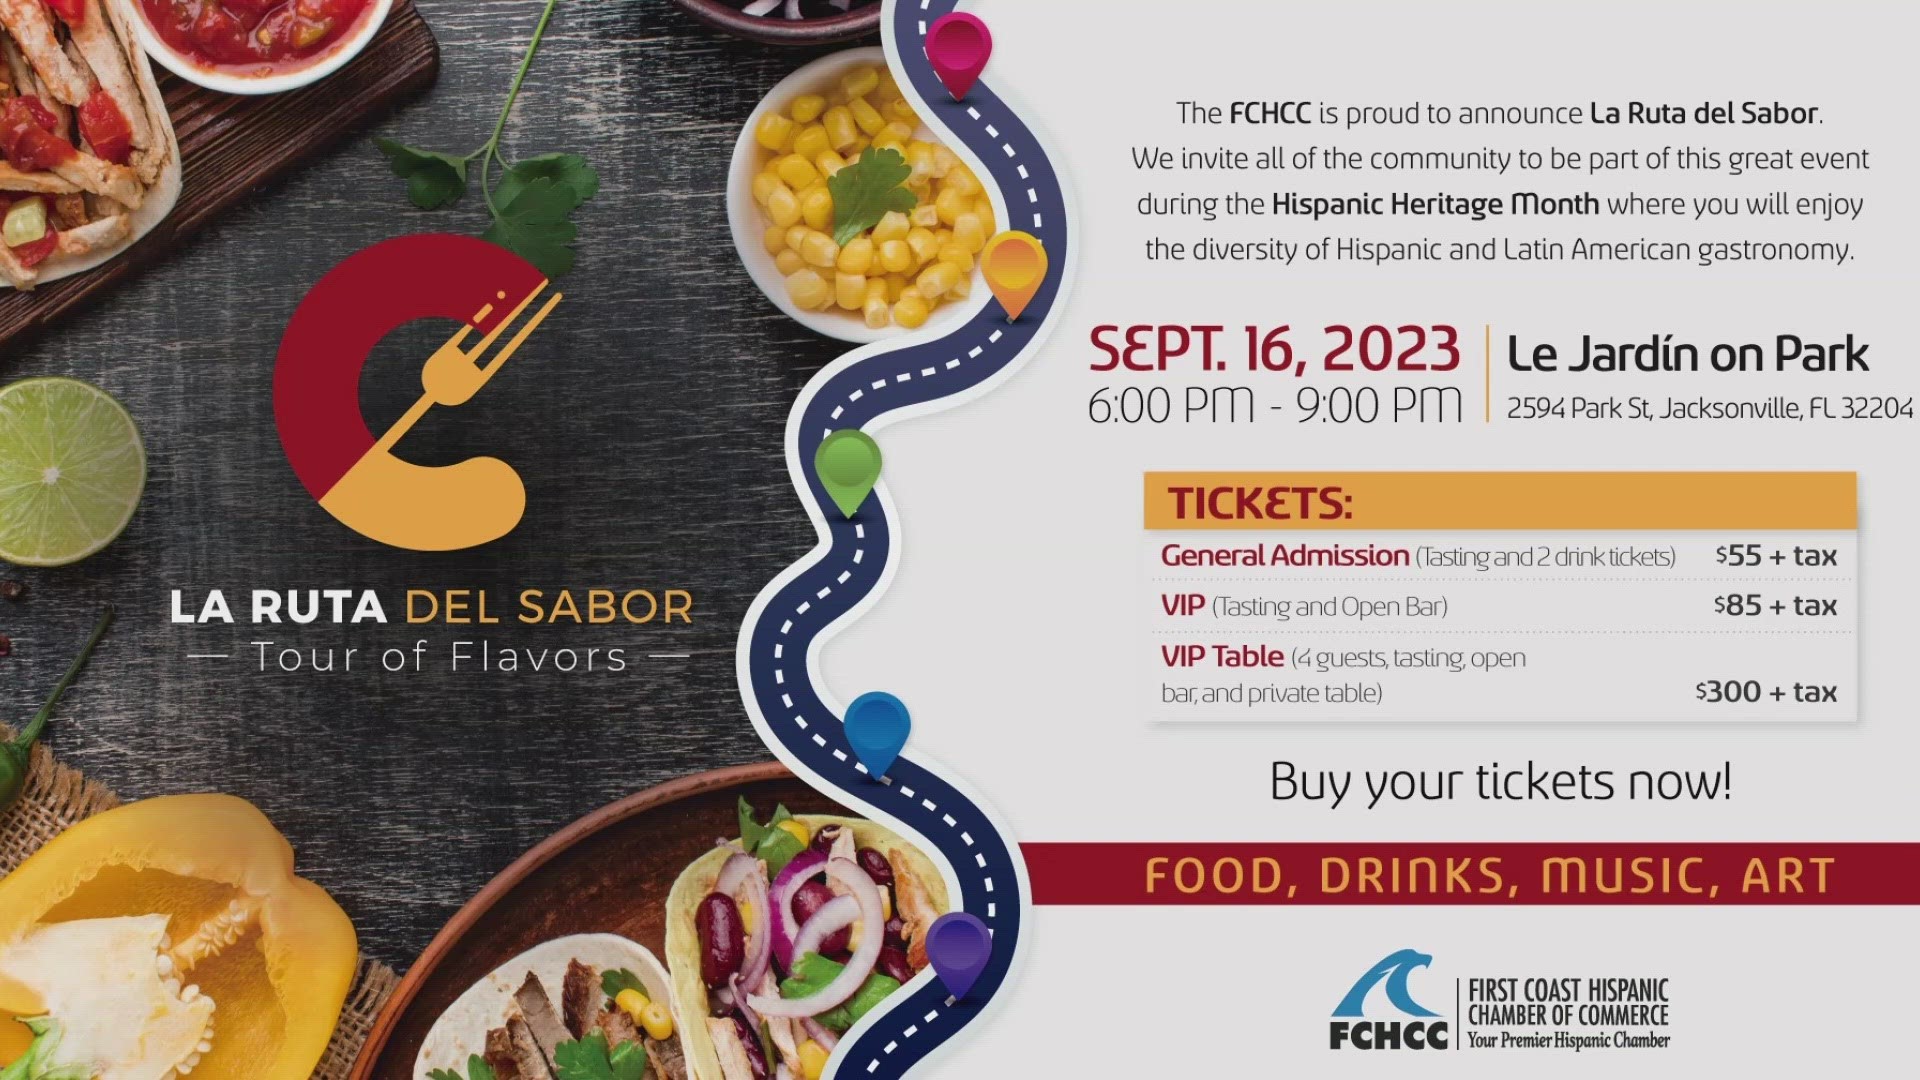 The First Coast Hispanic Chamber of Commerce is bringing back its La Ruta Del Sabor or Tour of Flavors event on Saturday at Le Jardin on Park from 6 p.m. to 9 p.m.